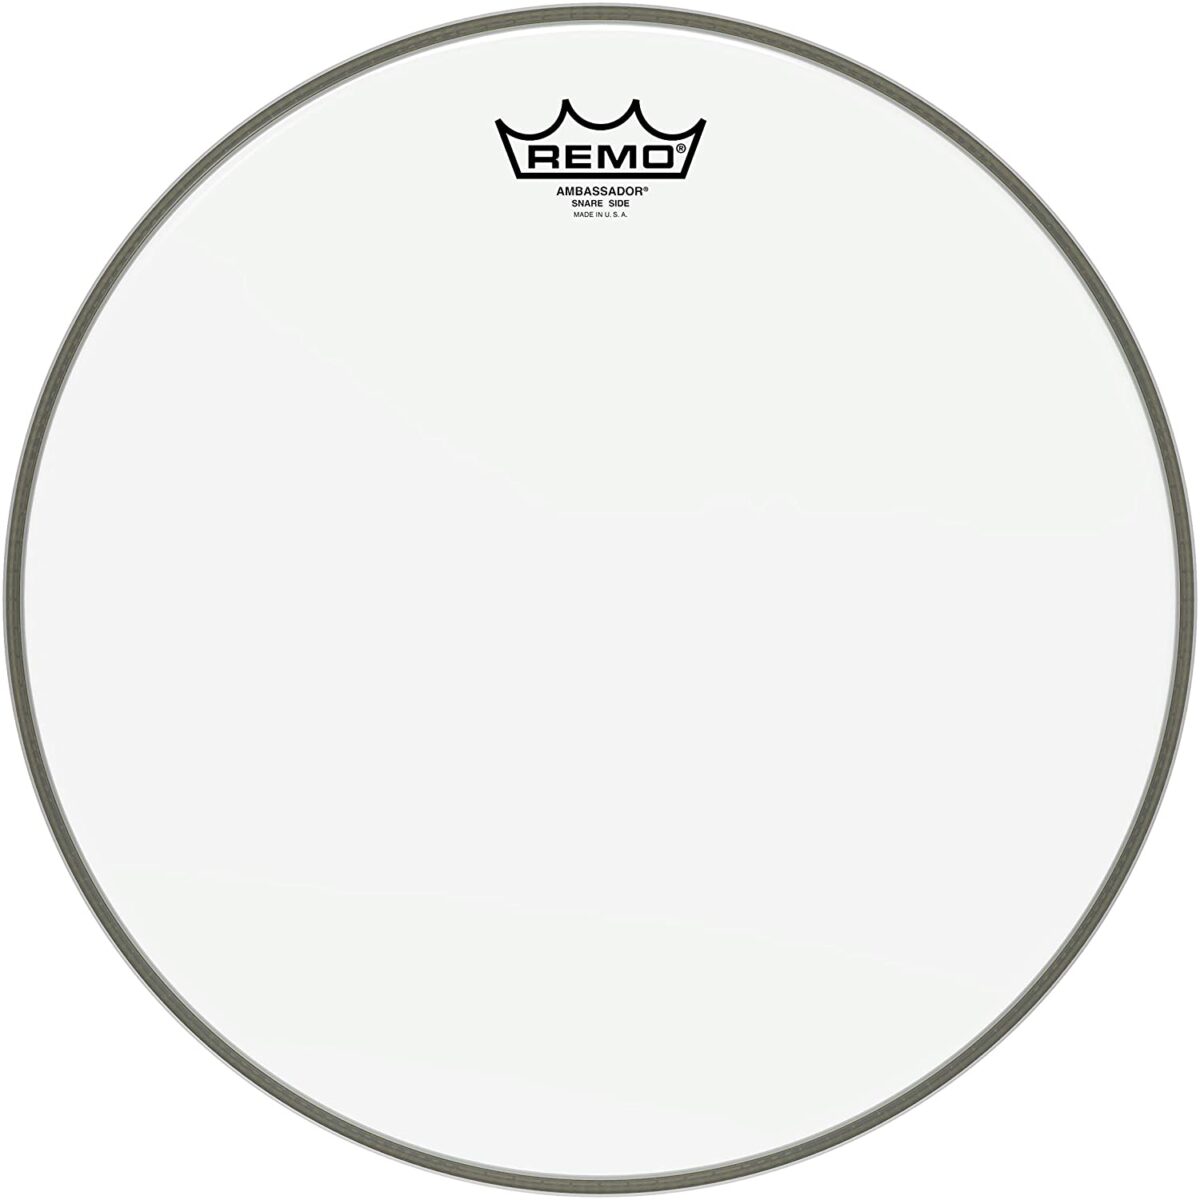 Find the Best Drumheads for Deep Sound and Revive Your Passion for Music